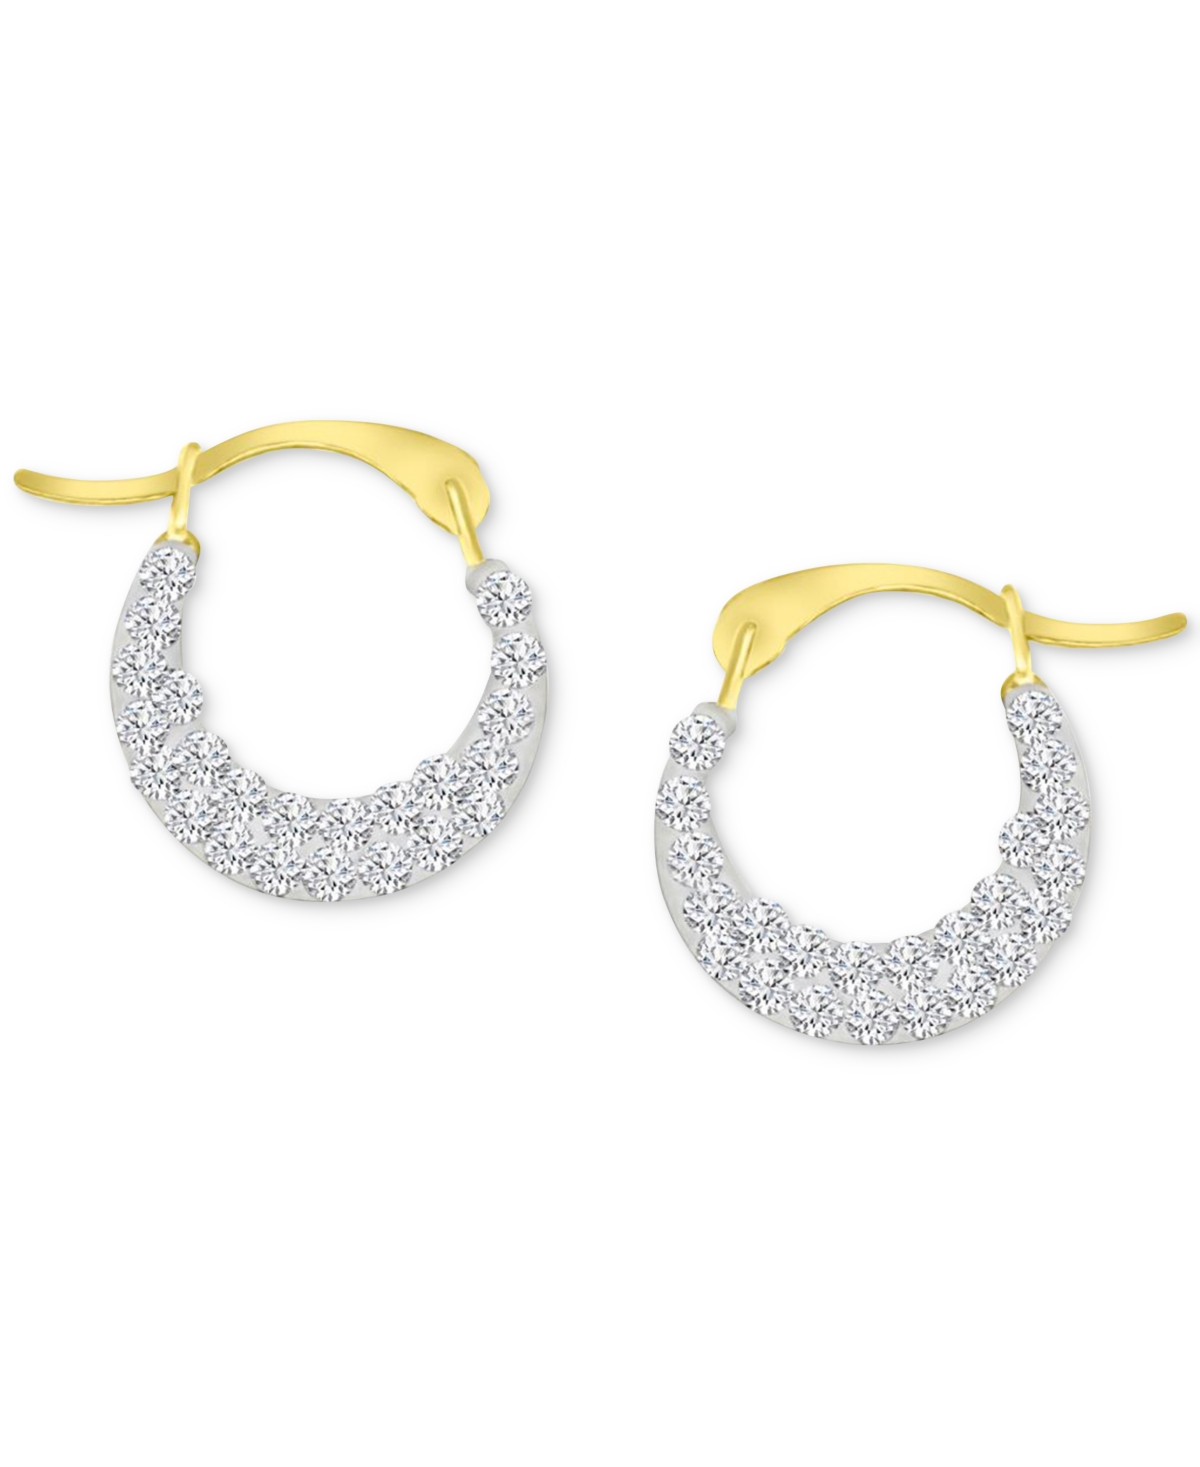 Crystal Pave Extra Small Hoop Earrings in 10k Gold, 0.45" - Gold